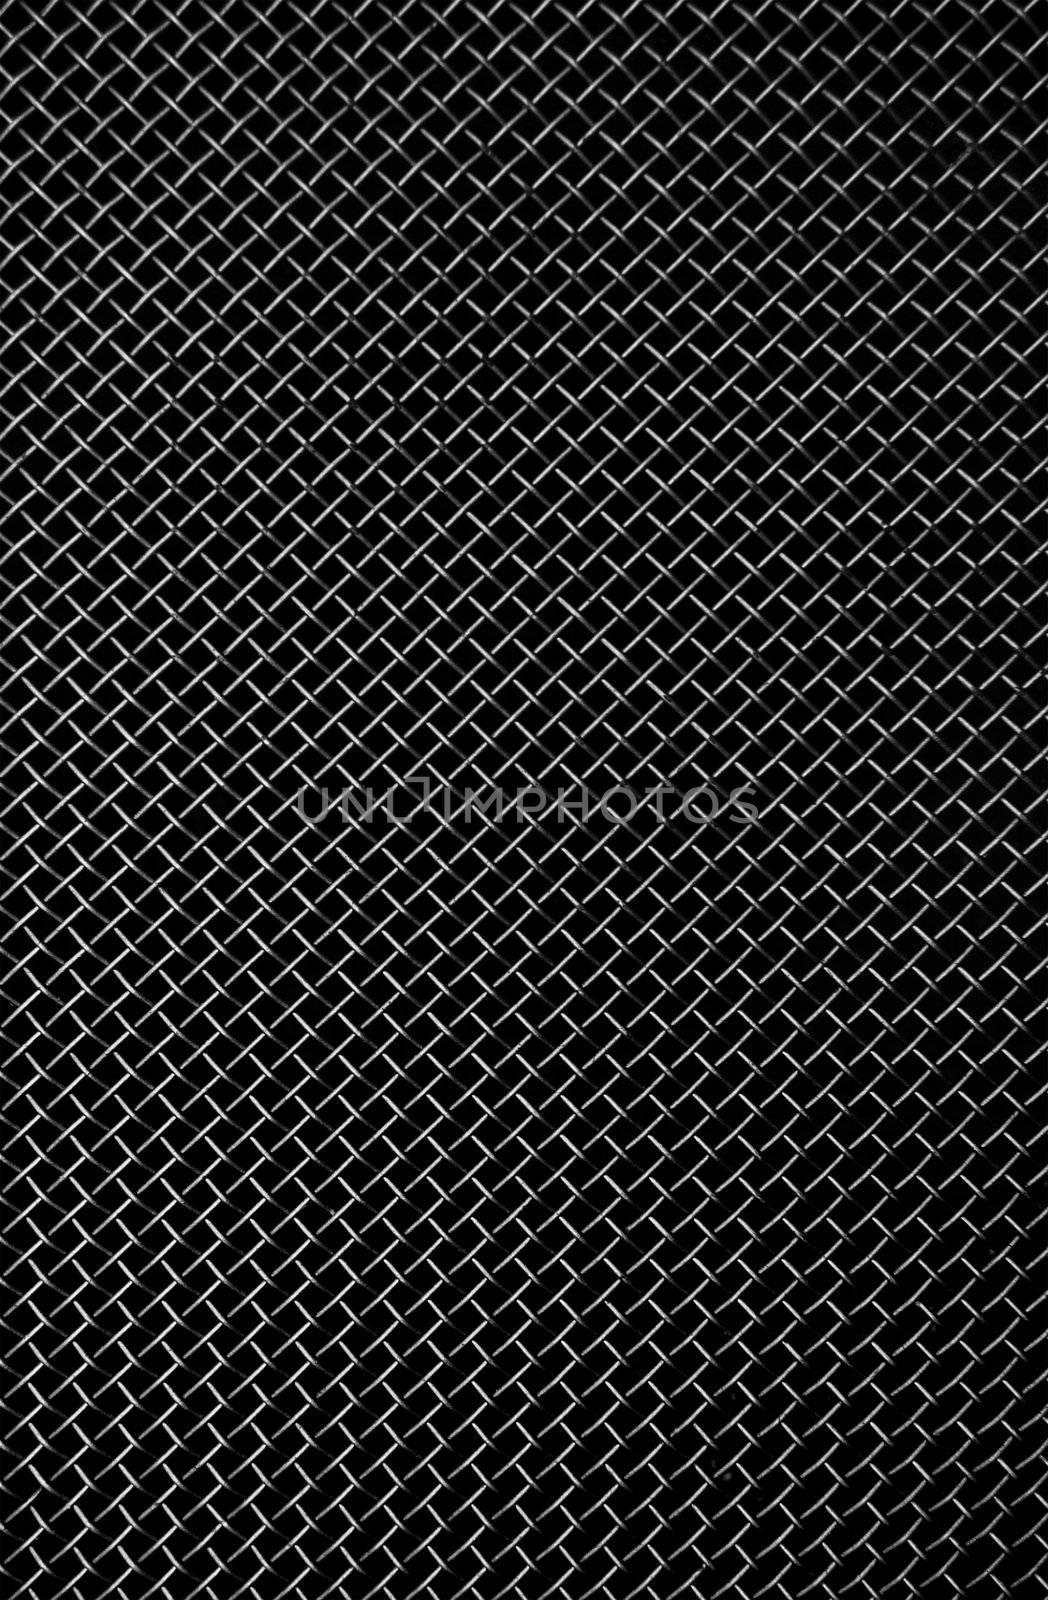 texture of a black metal grill by maxpro